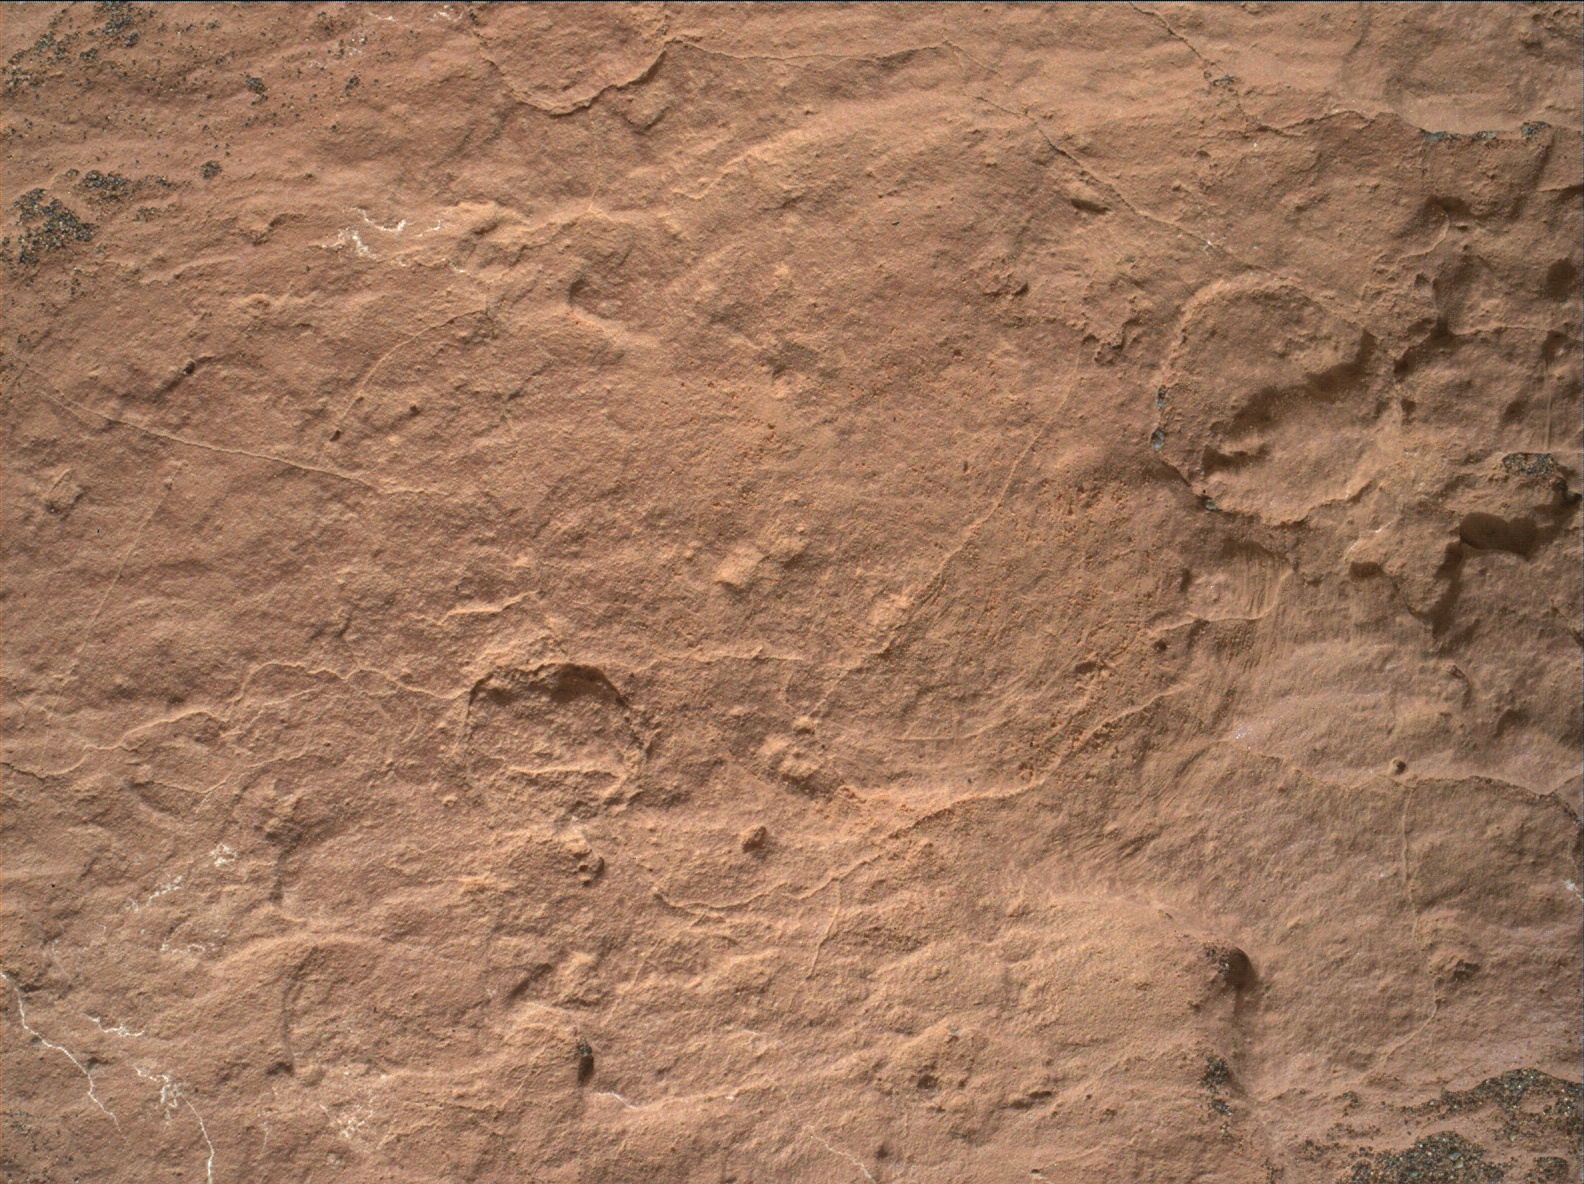 Nasa's Mars rover Curiosity acquired this image using its Mars Hand Lens Imager (MAHLI) on Sol 1587